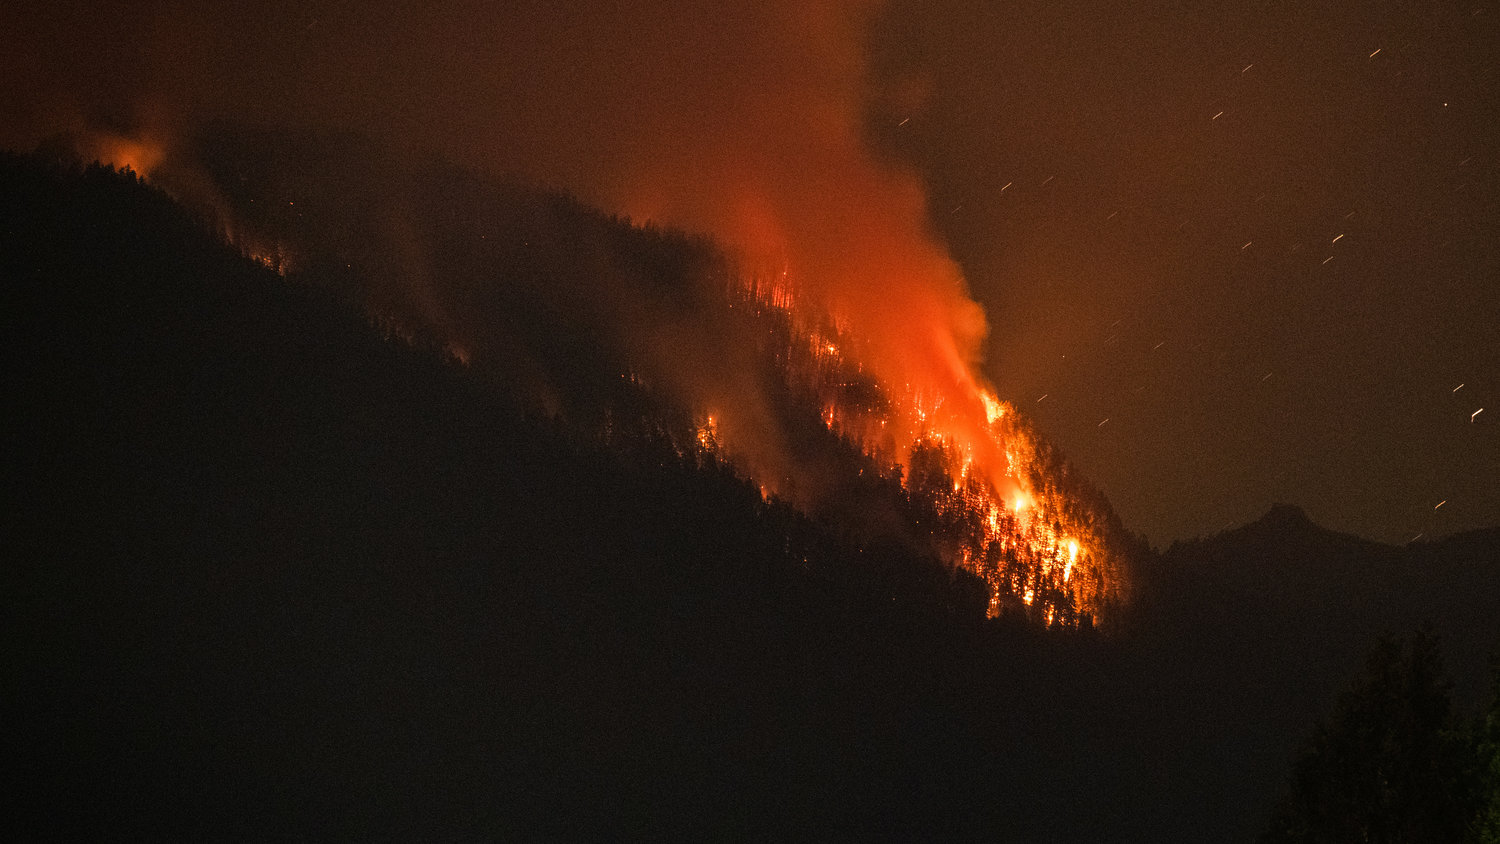 Flames from the Goat Rocks Fire ignites trees last October, as seen from Cannon Road in Packwood over Butler Creek.